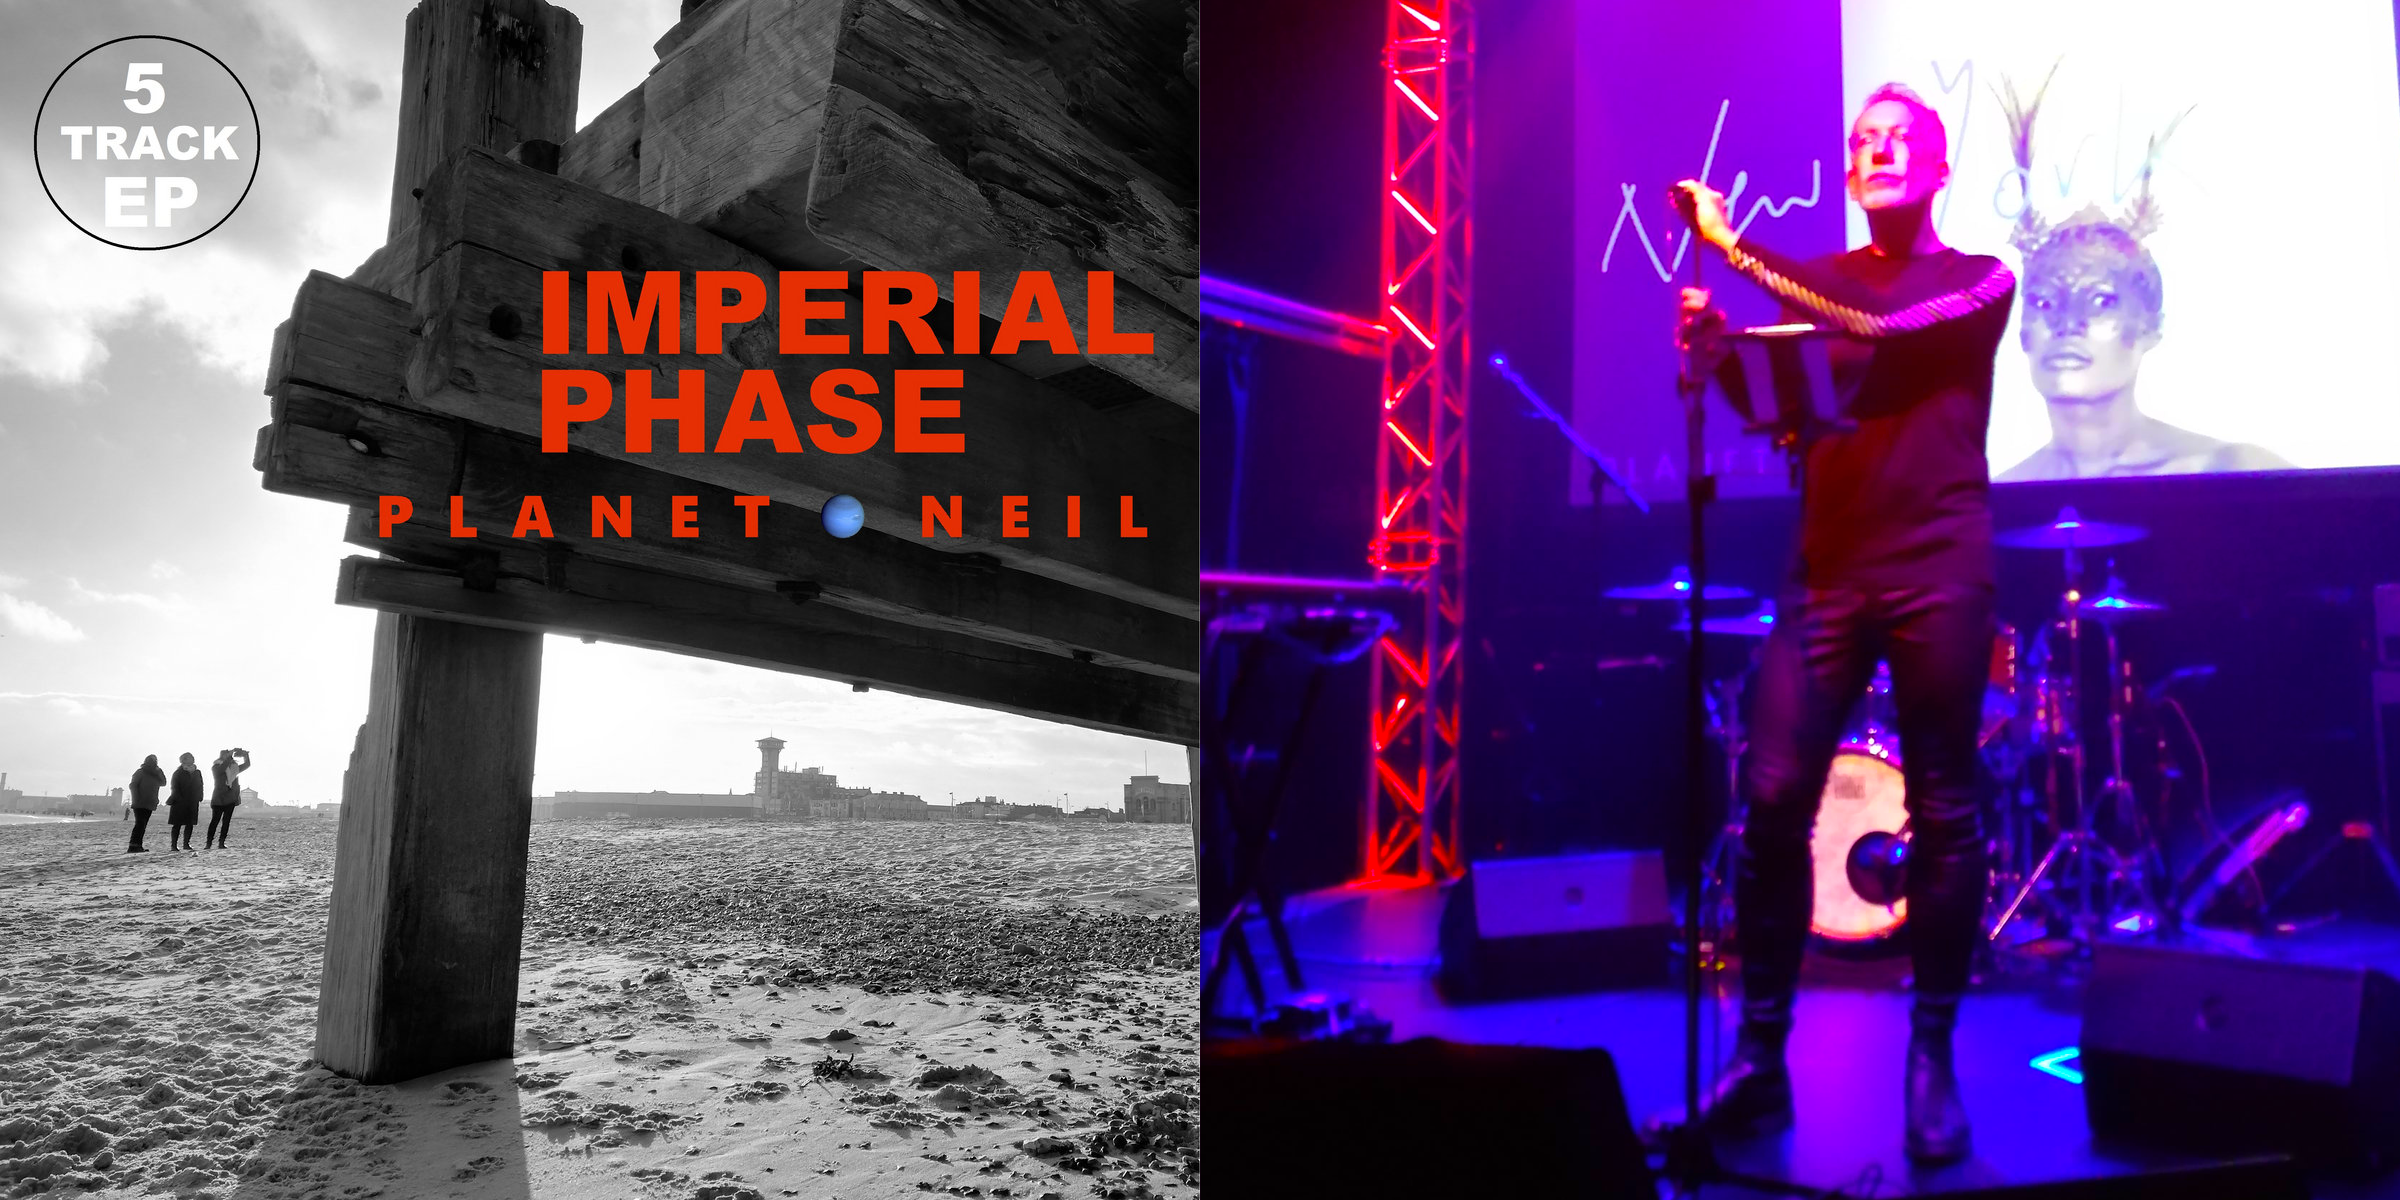 Image of album art for Planet Neil's EP "Imperial Phase," juxtaposed with an image of Neil Dyer on stage.